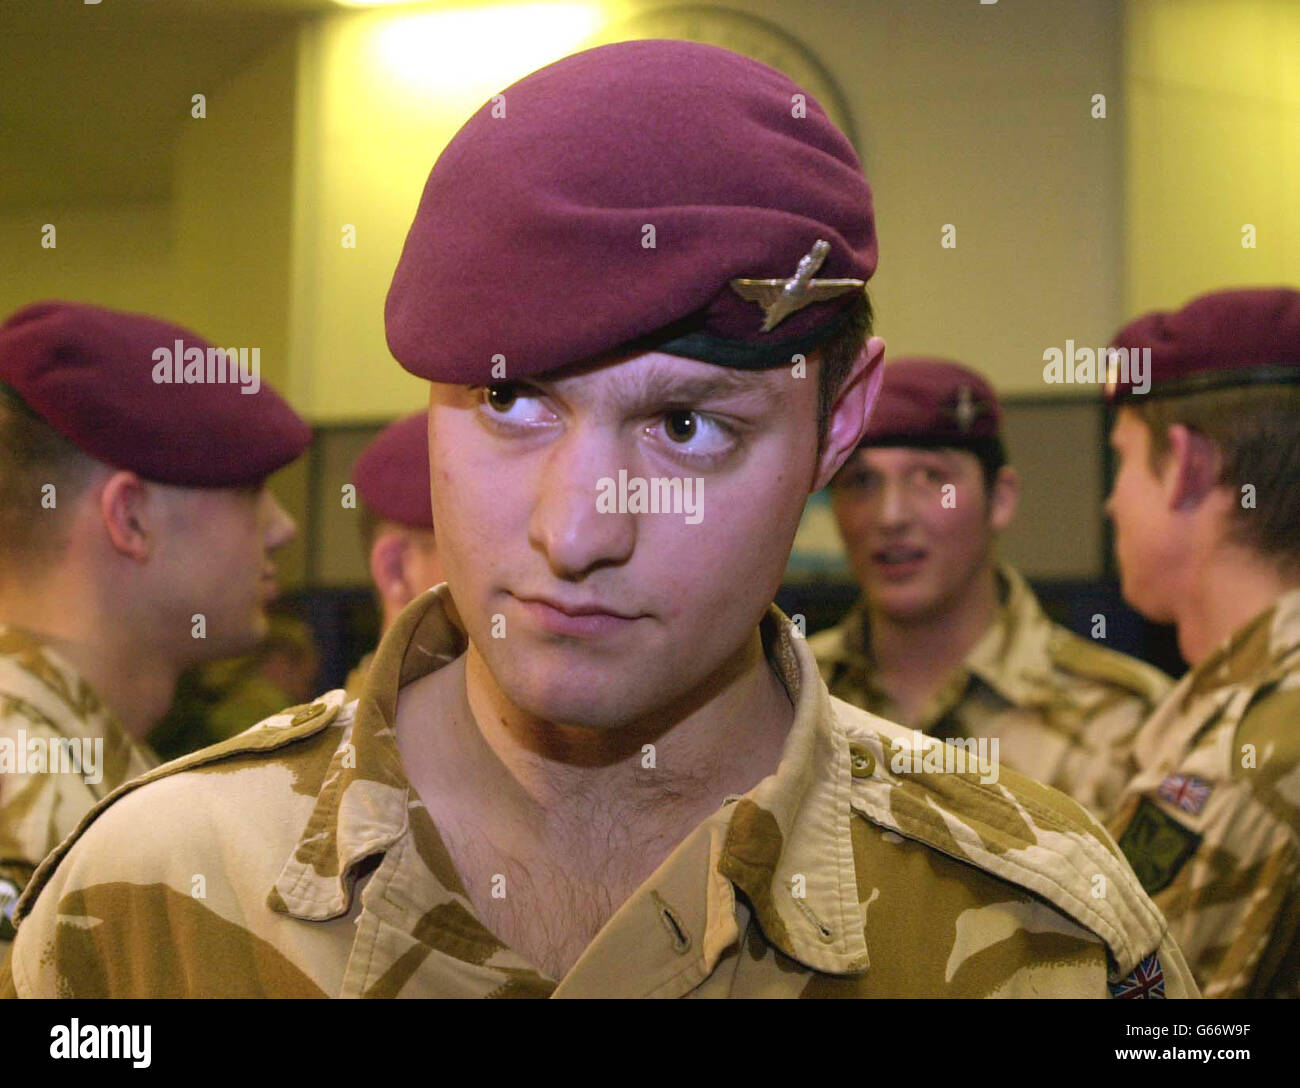 Private Daniel Tearle, 20, from Leighton Buzzard waits with other soldiers, including members of 16 Air Assault Brigade, in a departure lounge at RAF Brize Norton in Oxfordshire before heading for the Gulf aboard a Tristar passenger aircraft. * They will be joining British forces in the region deployed ahead of possible military action againgst Iraq. Stock Photo